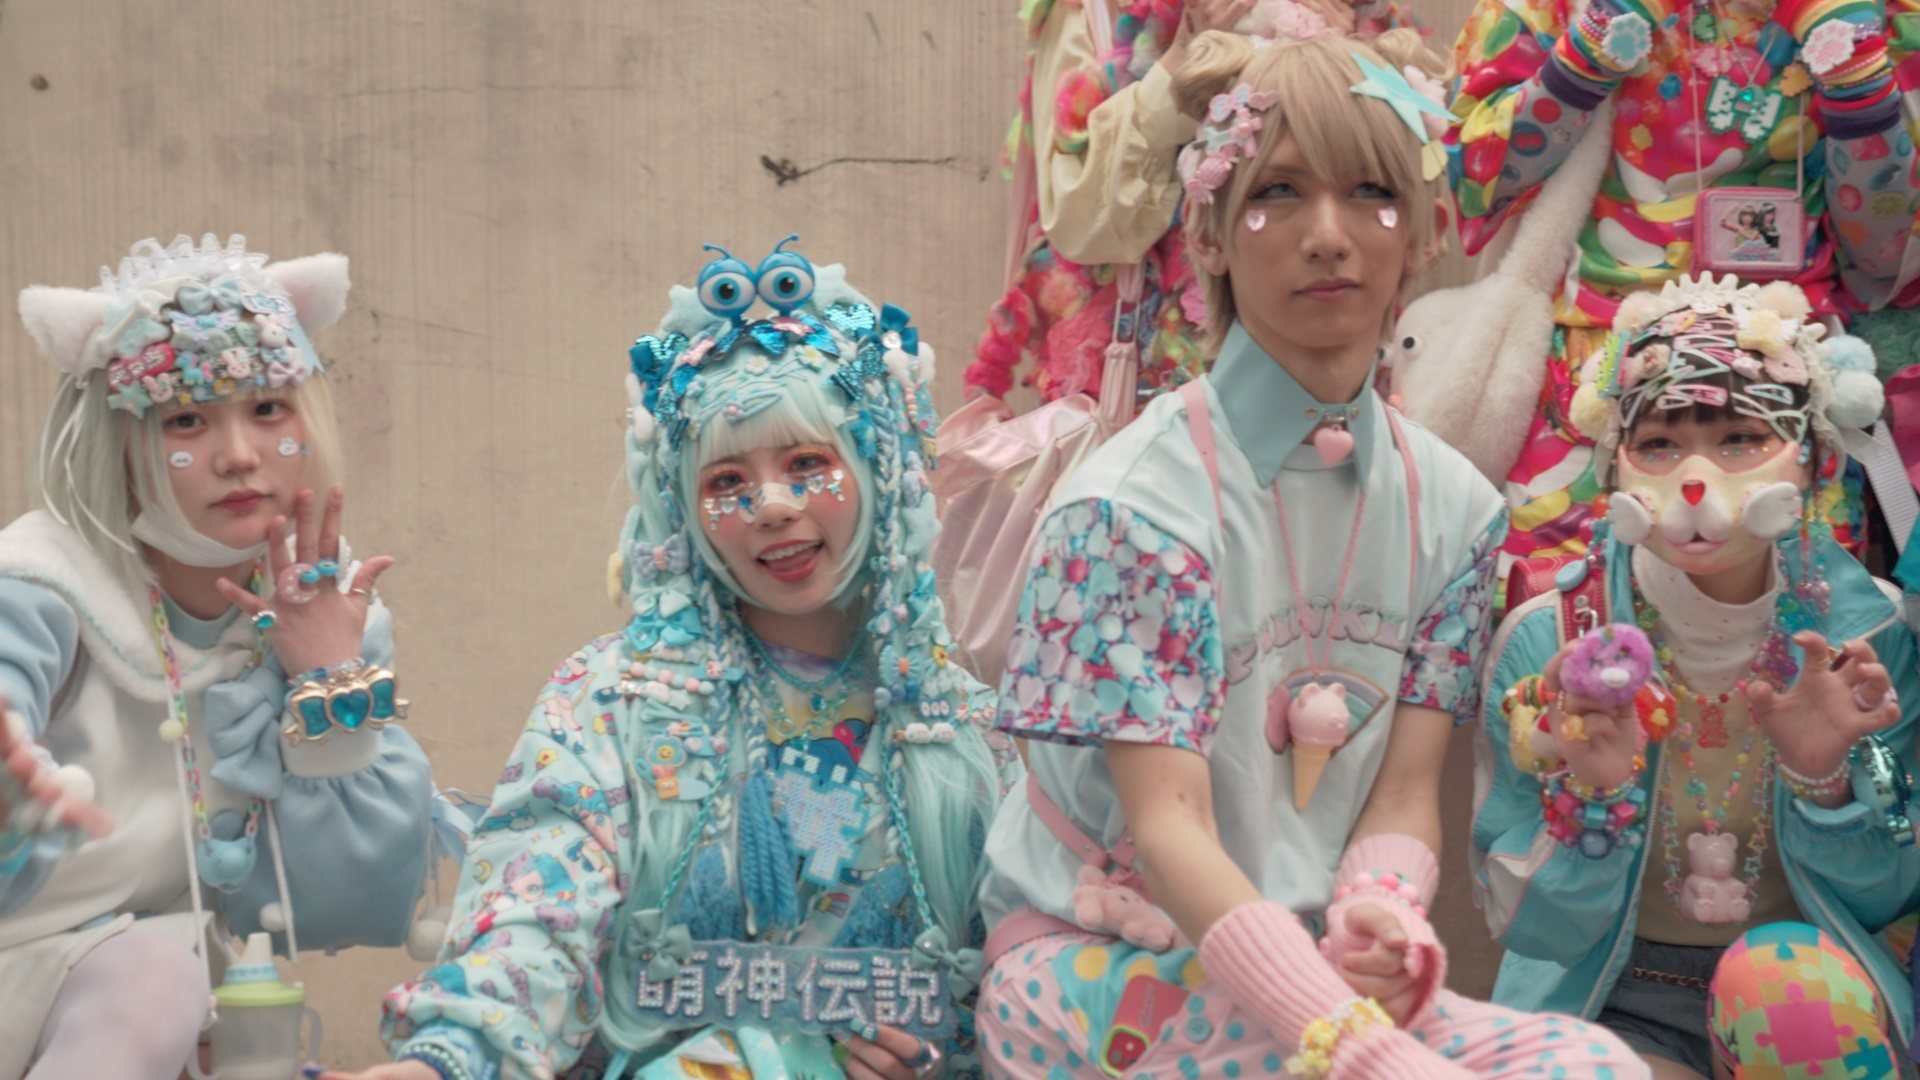 Three participants of a recent Neo-Decora Kai event in Harajuku, Tokyo. Decora, a fashion subculture that had fallen out of favour by the end of the 2010s, is seeing a resurgence. Photo: Jonathan Vit
